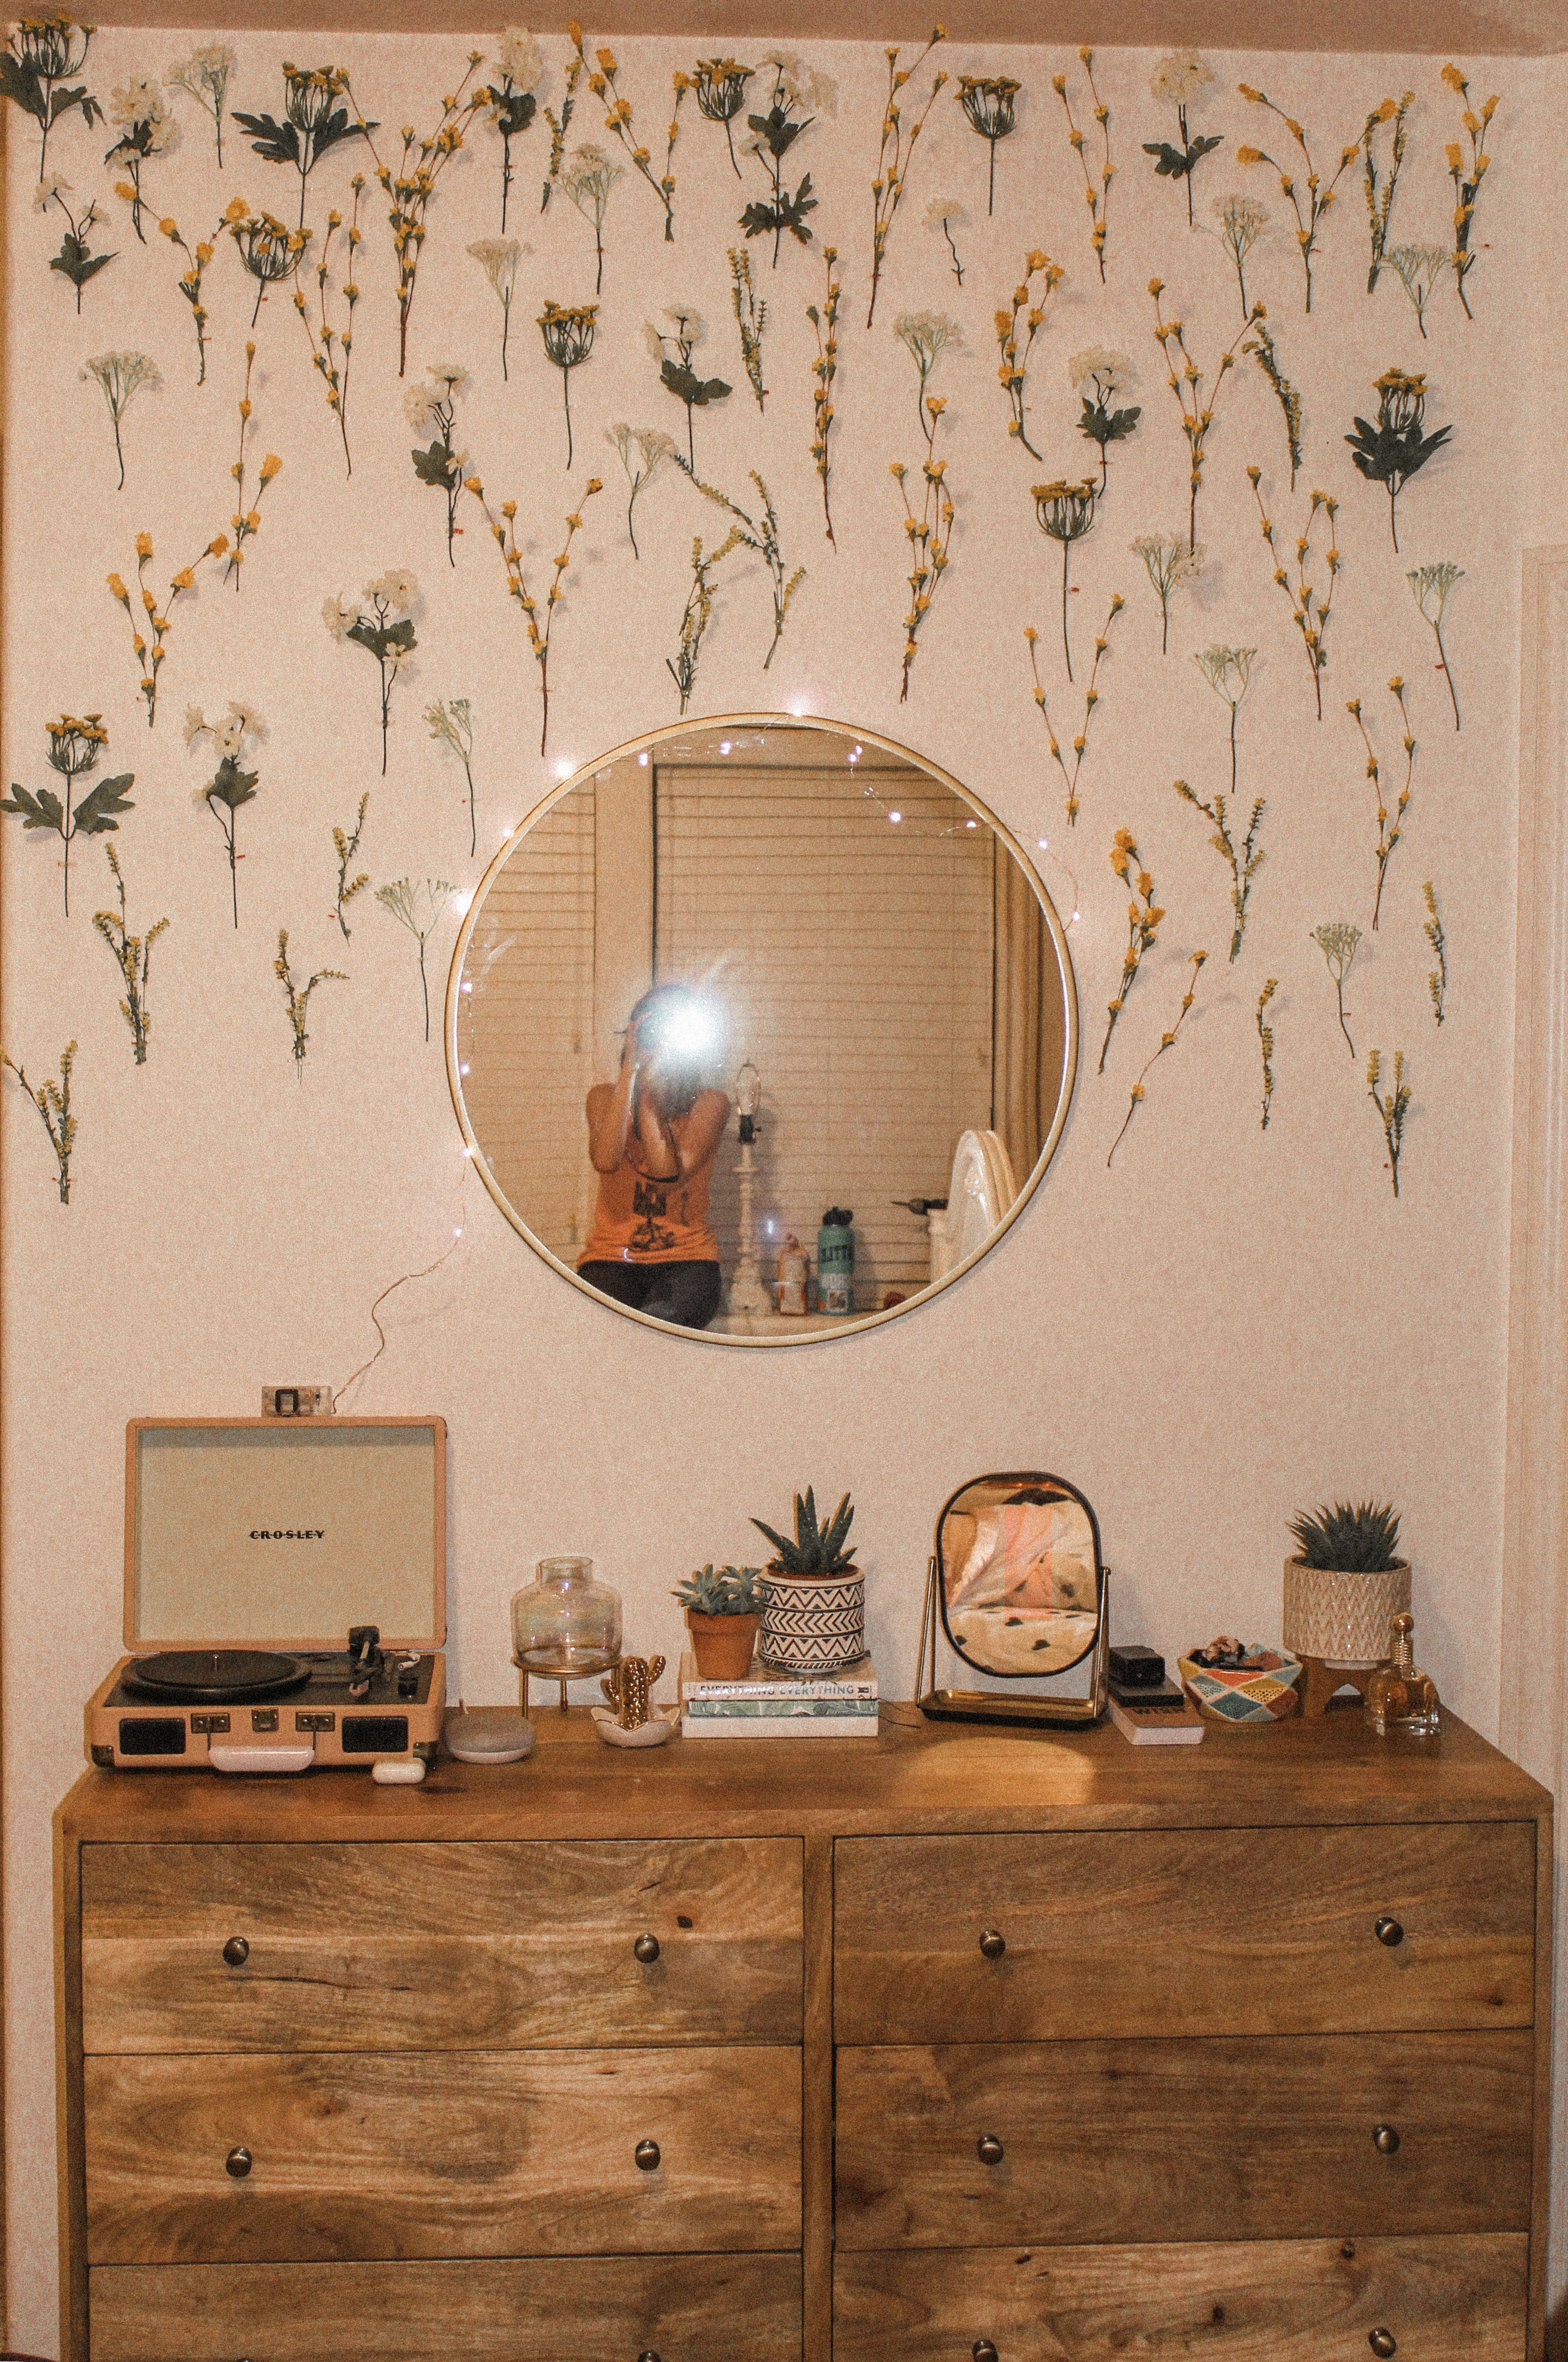 bulk makeup lobby side round bathrooms square gold for target table spaces small bathroom cir canadian convex accent best decorative compact vanity mirrors michaels hobby tire